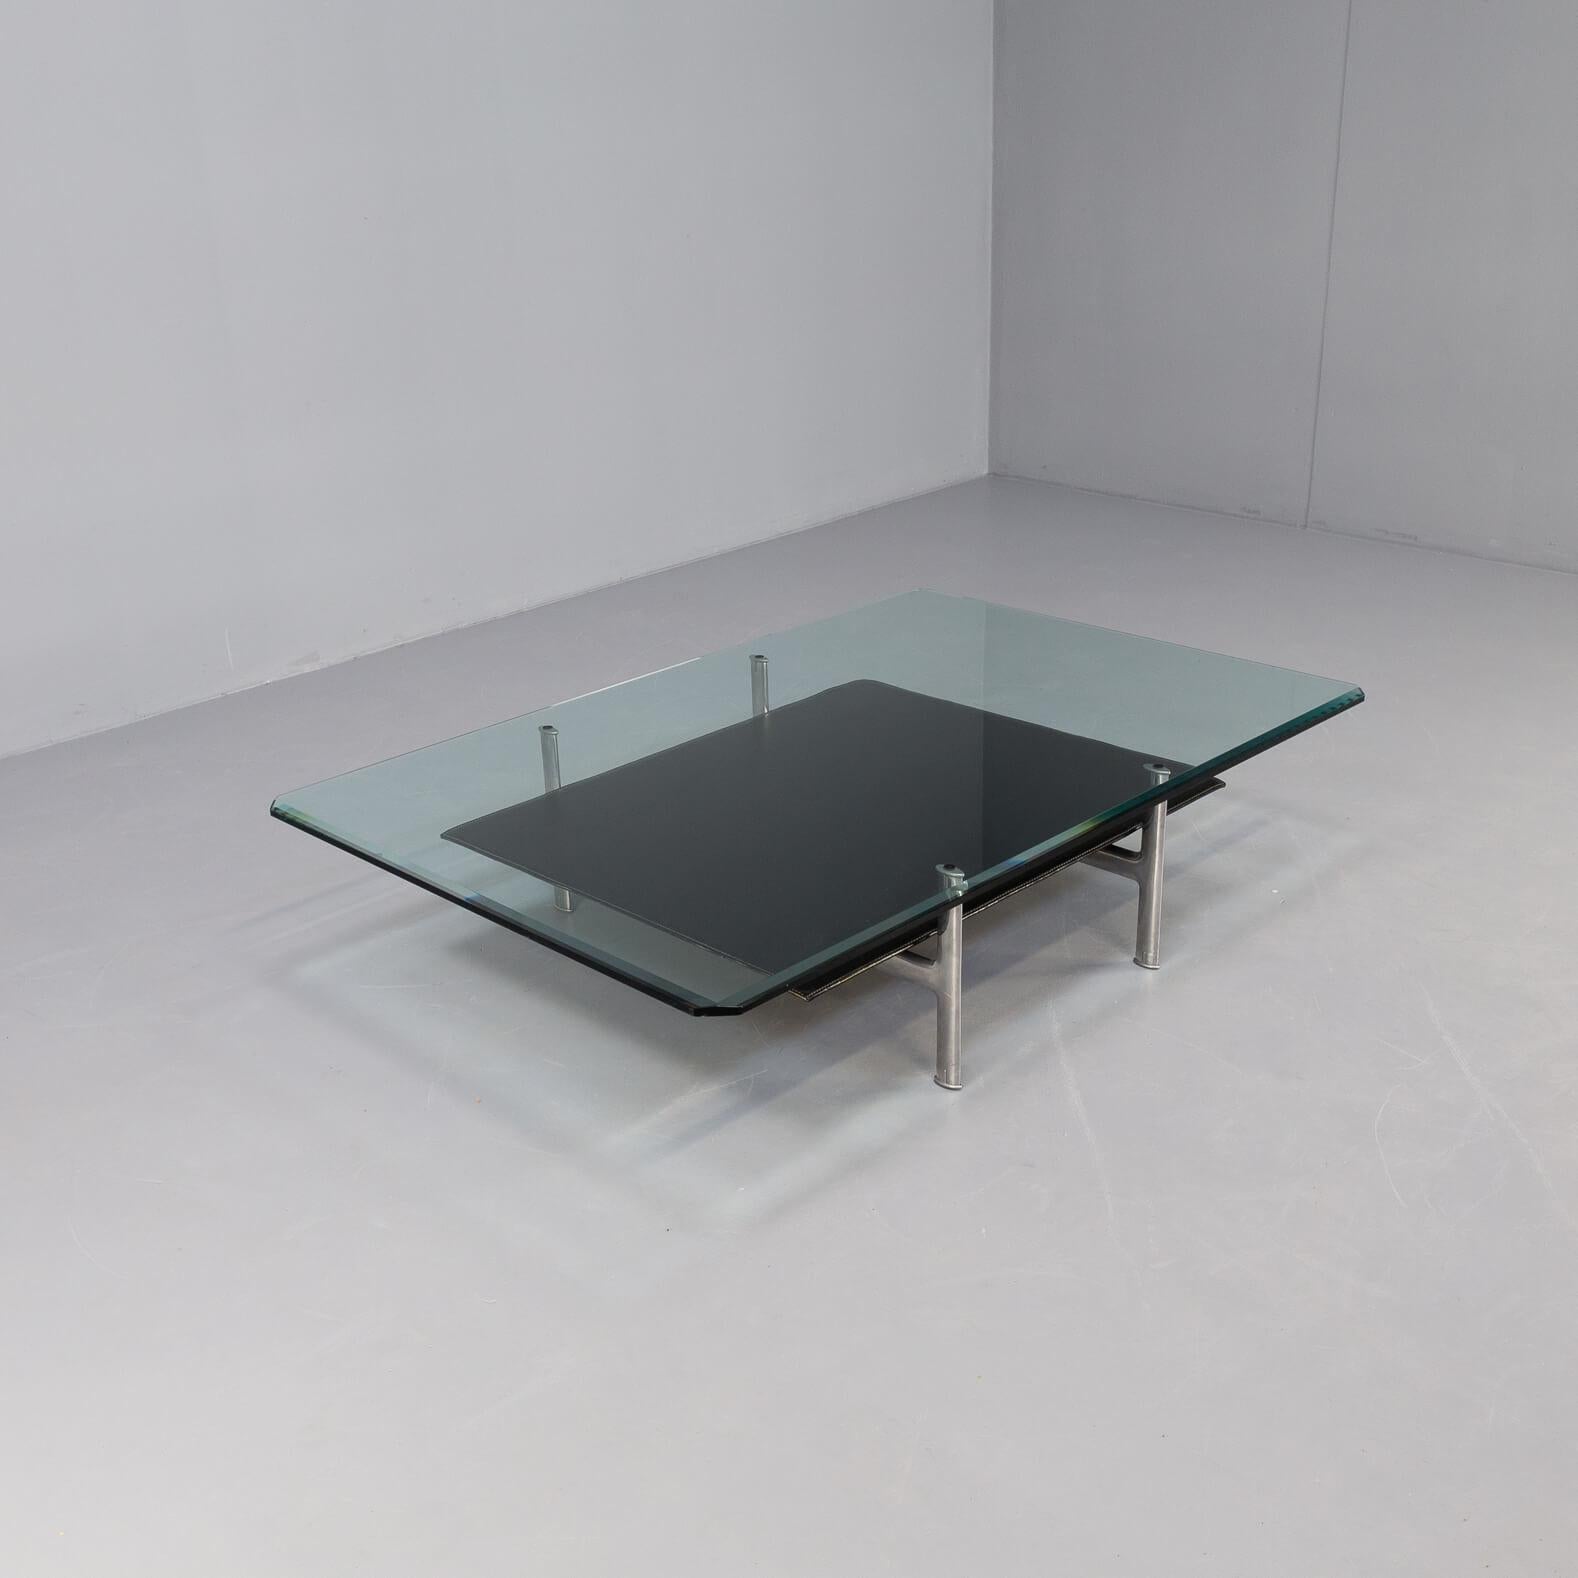 Diesis stands for technology, elegance, ergonomics and comfort. An absolute icon of the modern furniture tradition, combining innovative technology and sophisticated craftsmanship, the Diesis coffee table has become an essential element in the